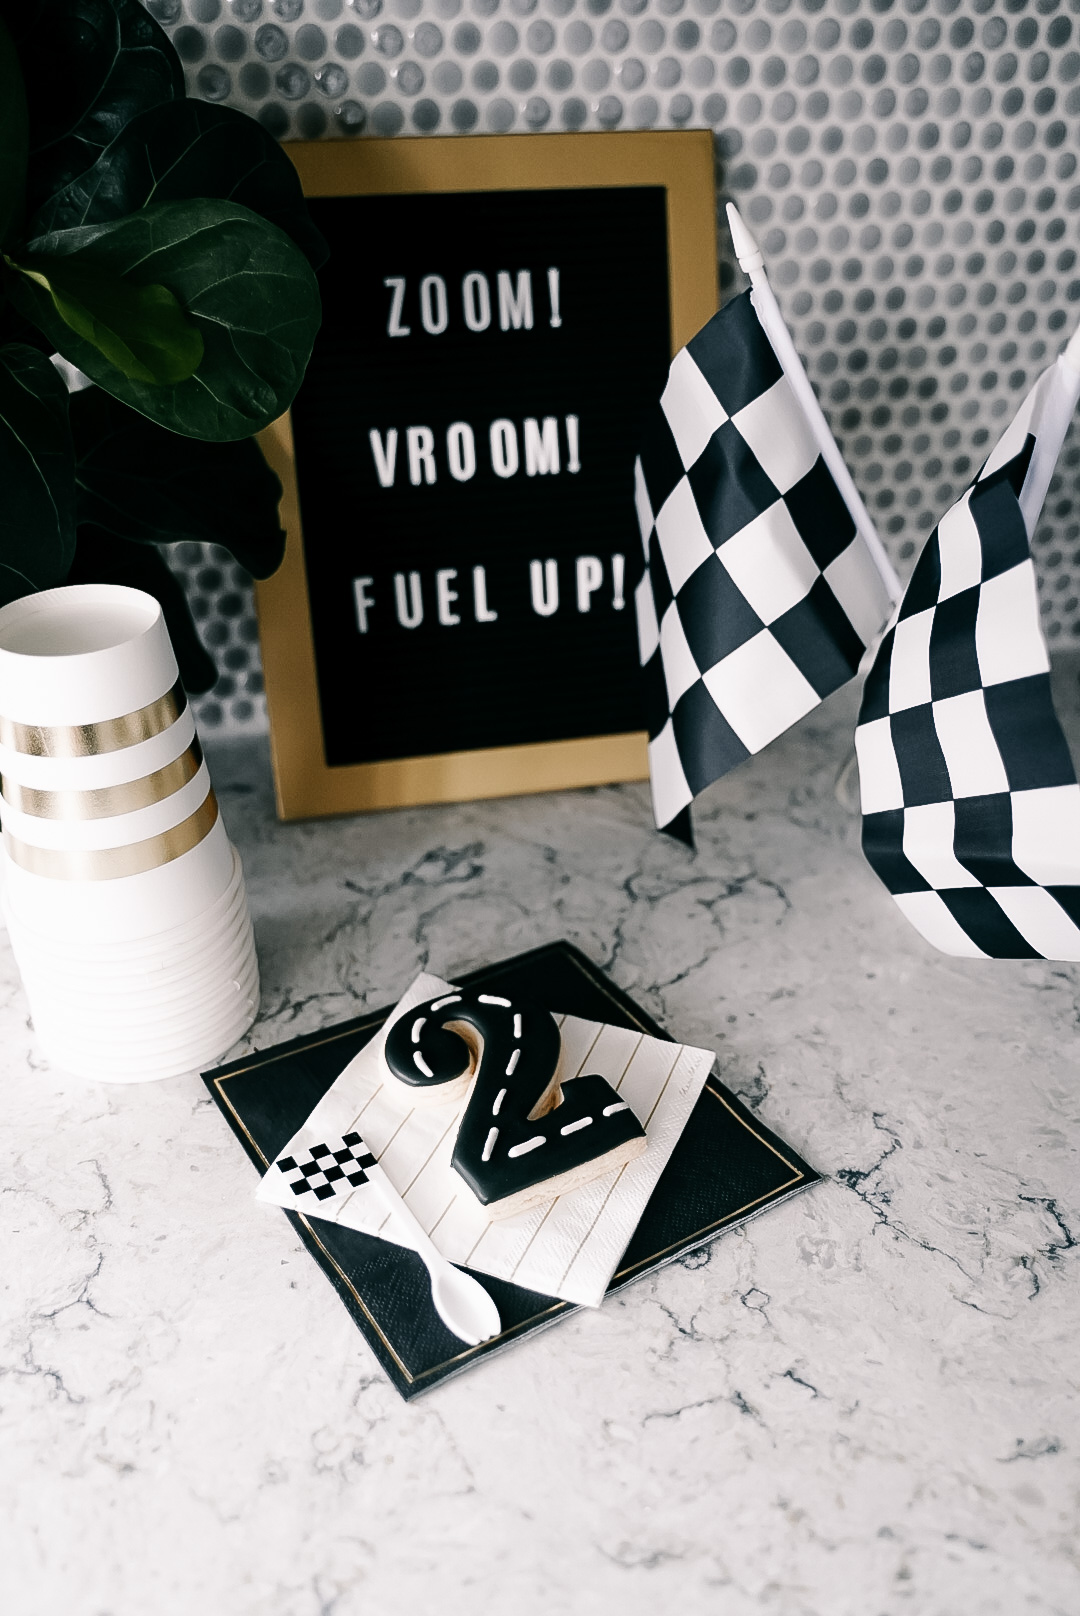 Isaiah Turns 2: A Modern Vintage Race Car Party